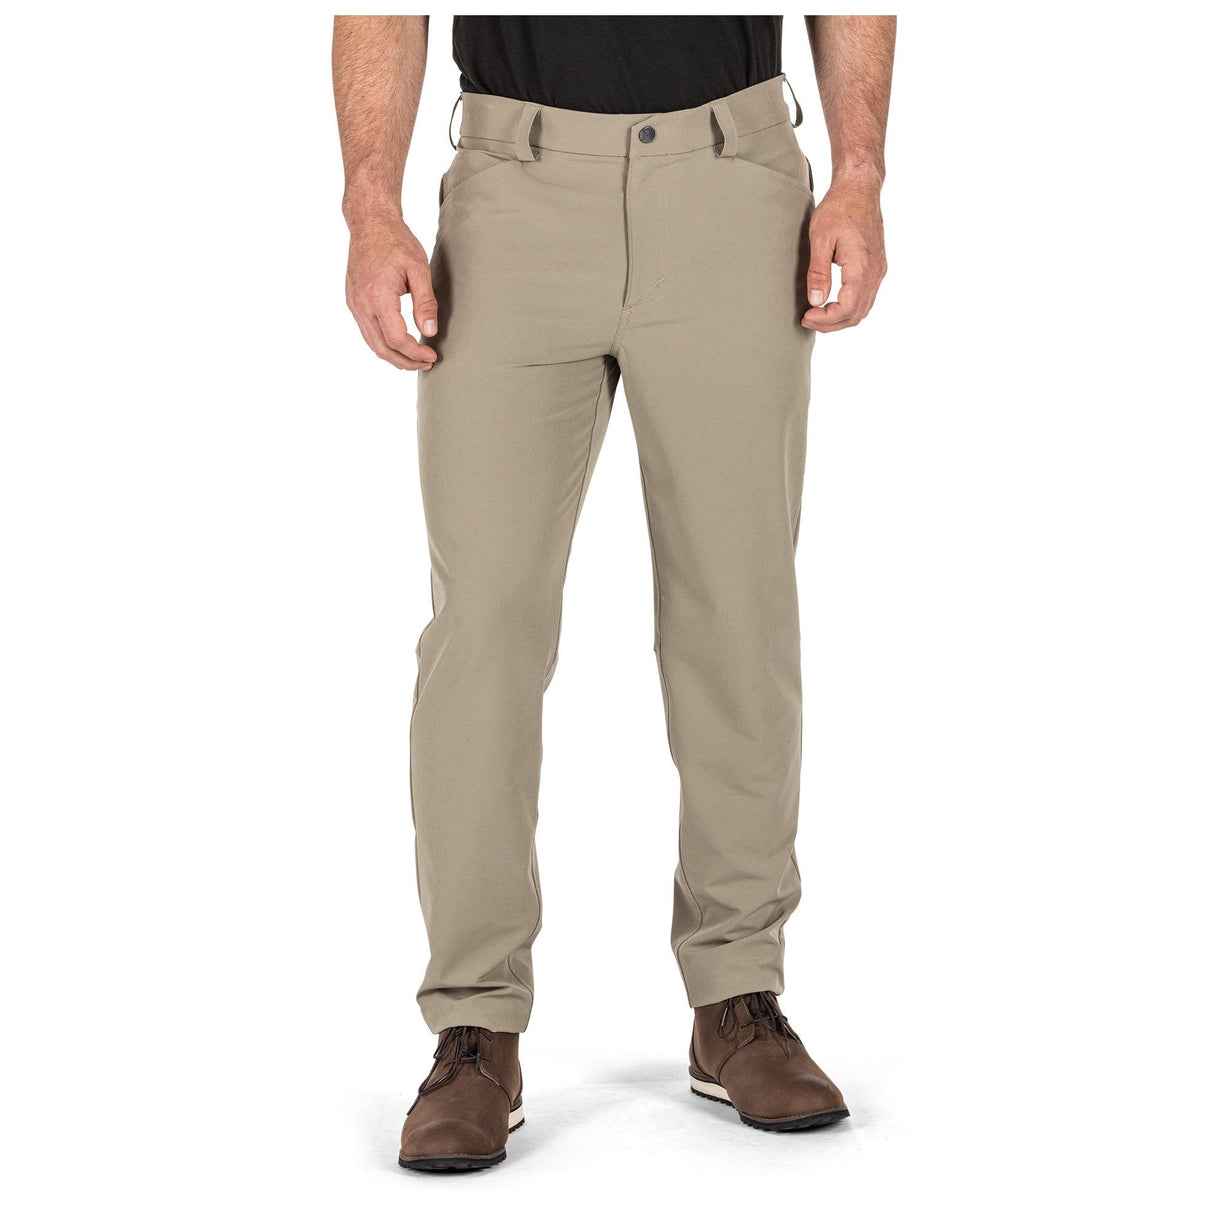 BRAVO PANT STONE - 5.11 Tactical Finland Store